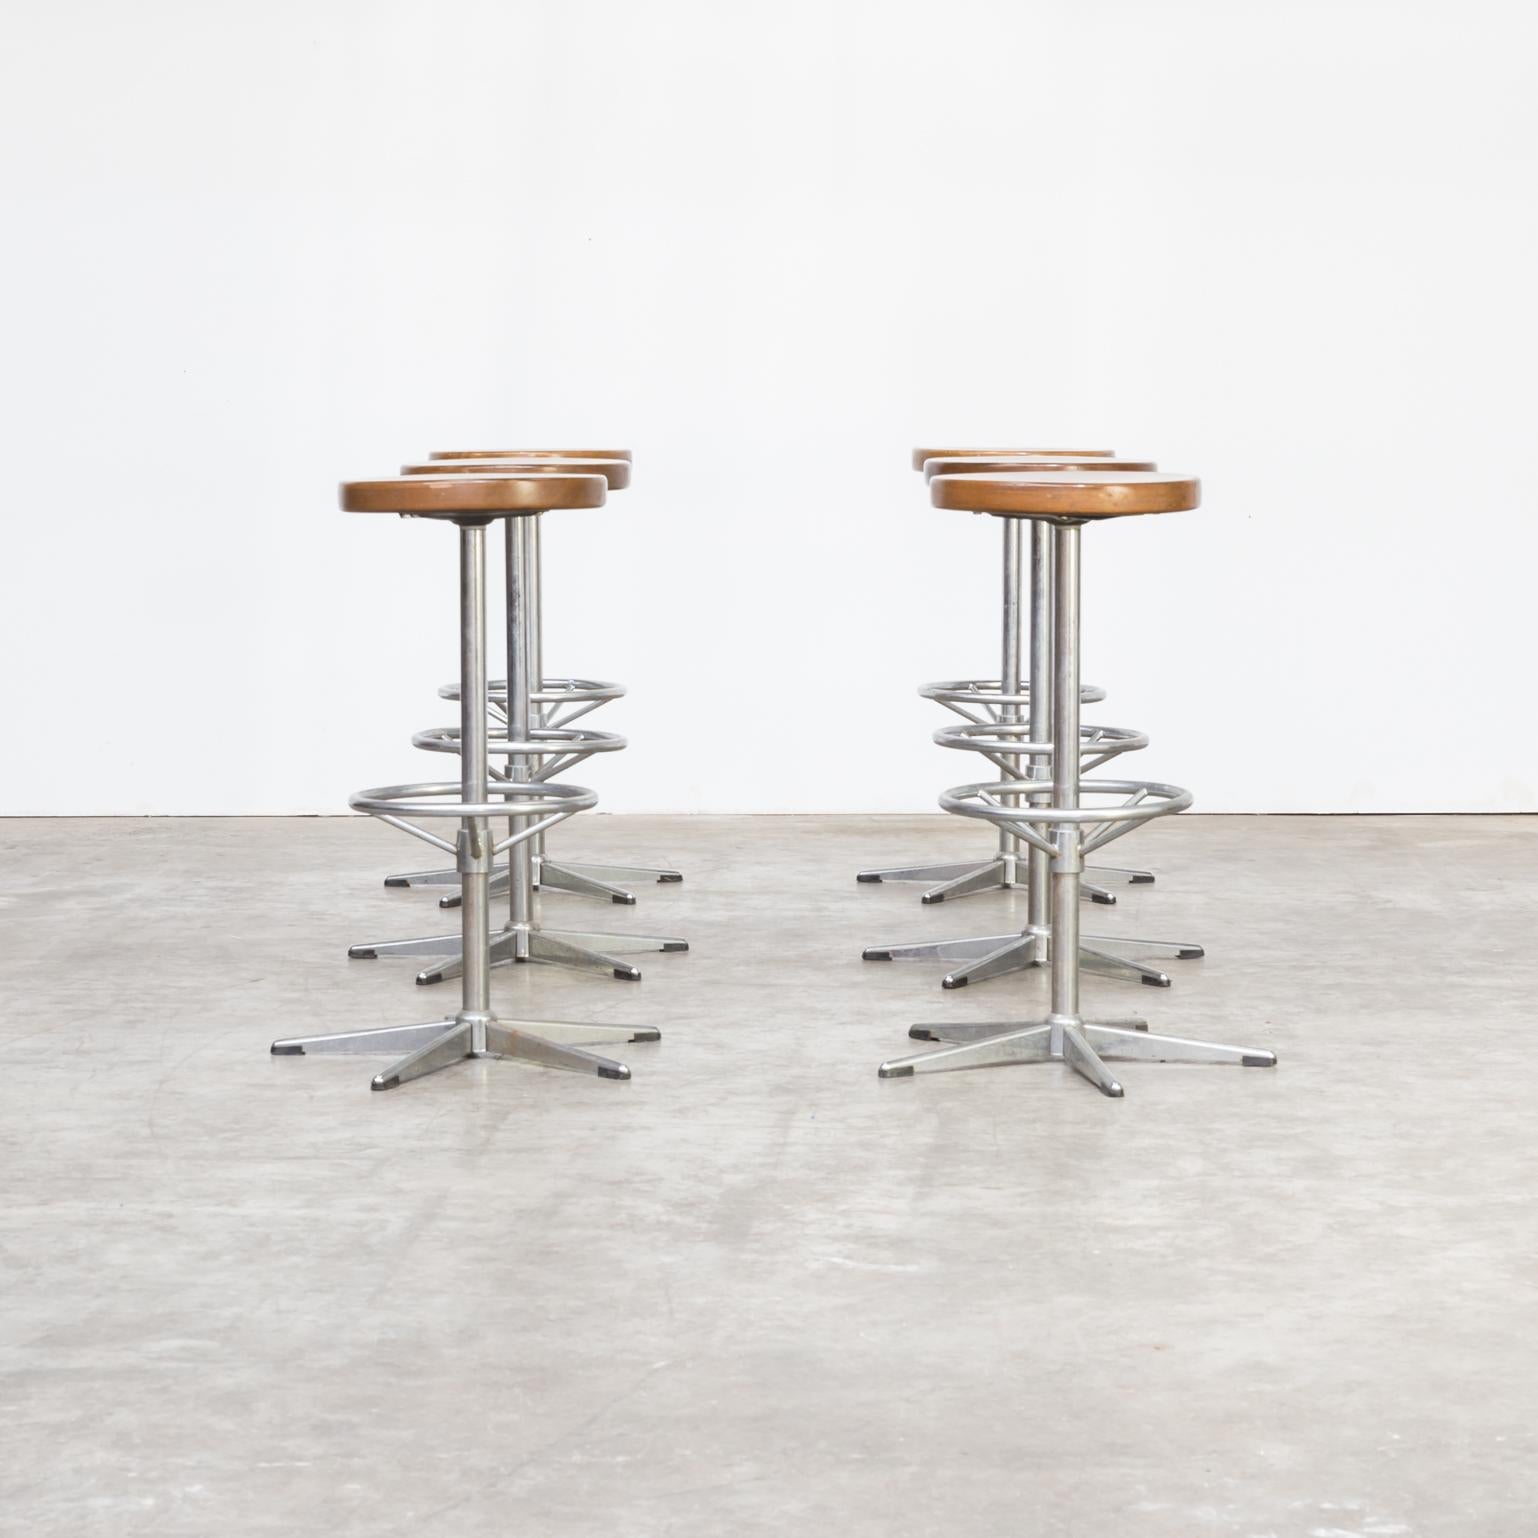 Mid-Century Modern Midcentury Chrome Framed Stools with Wooden Seat Set of Six For Sale